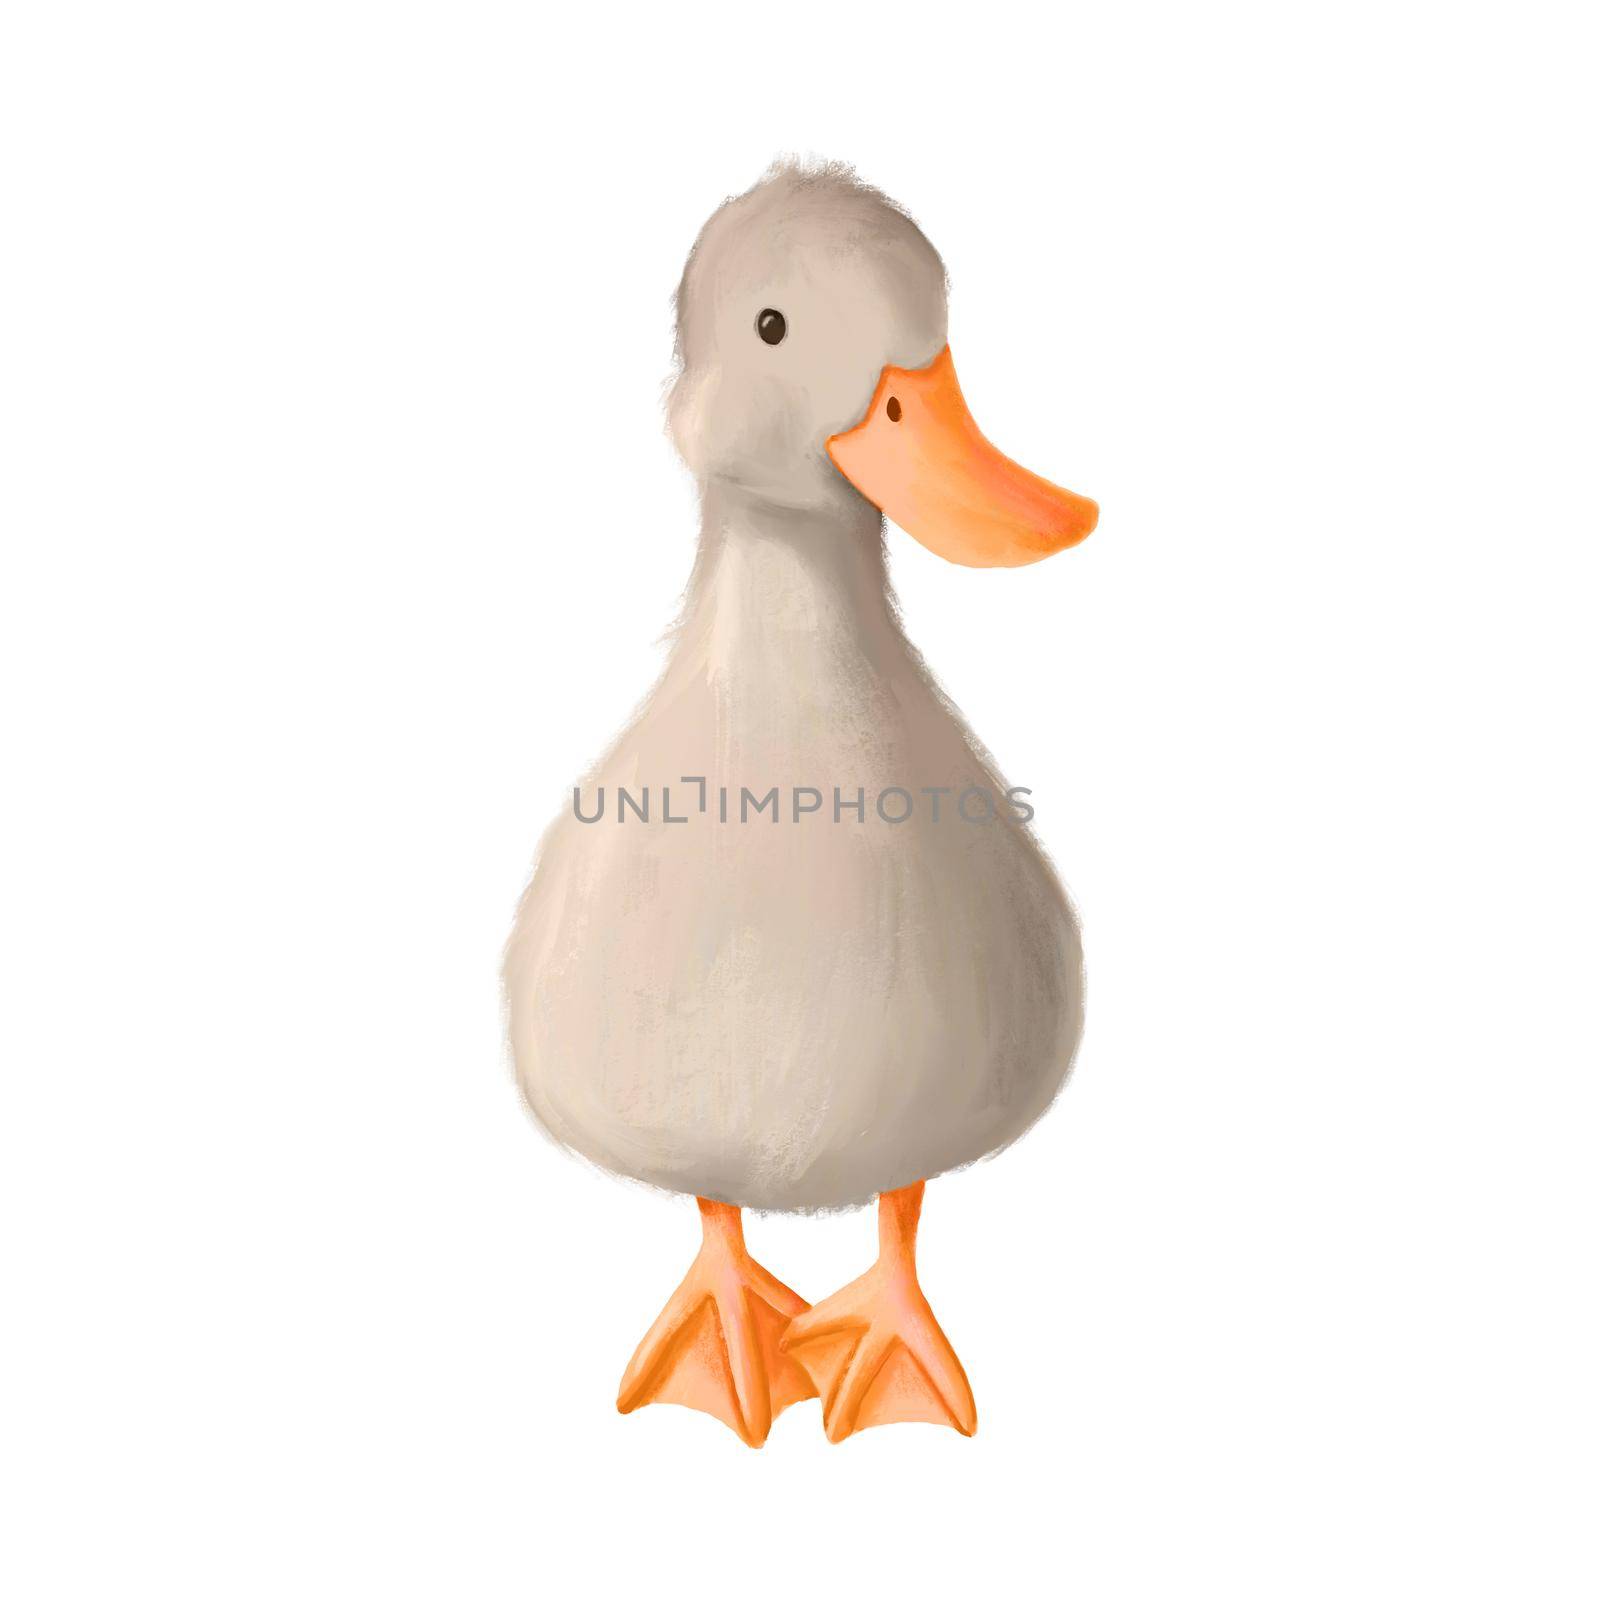 Cute cartoon duck standing. Hand drawn illustration isolated on white background. Farm animal